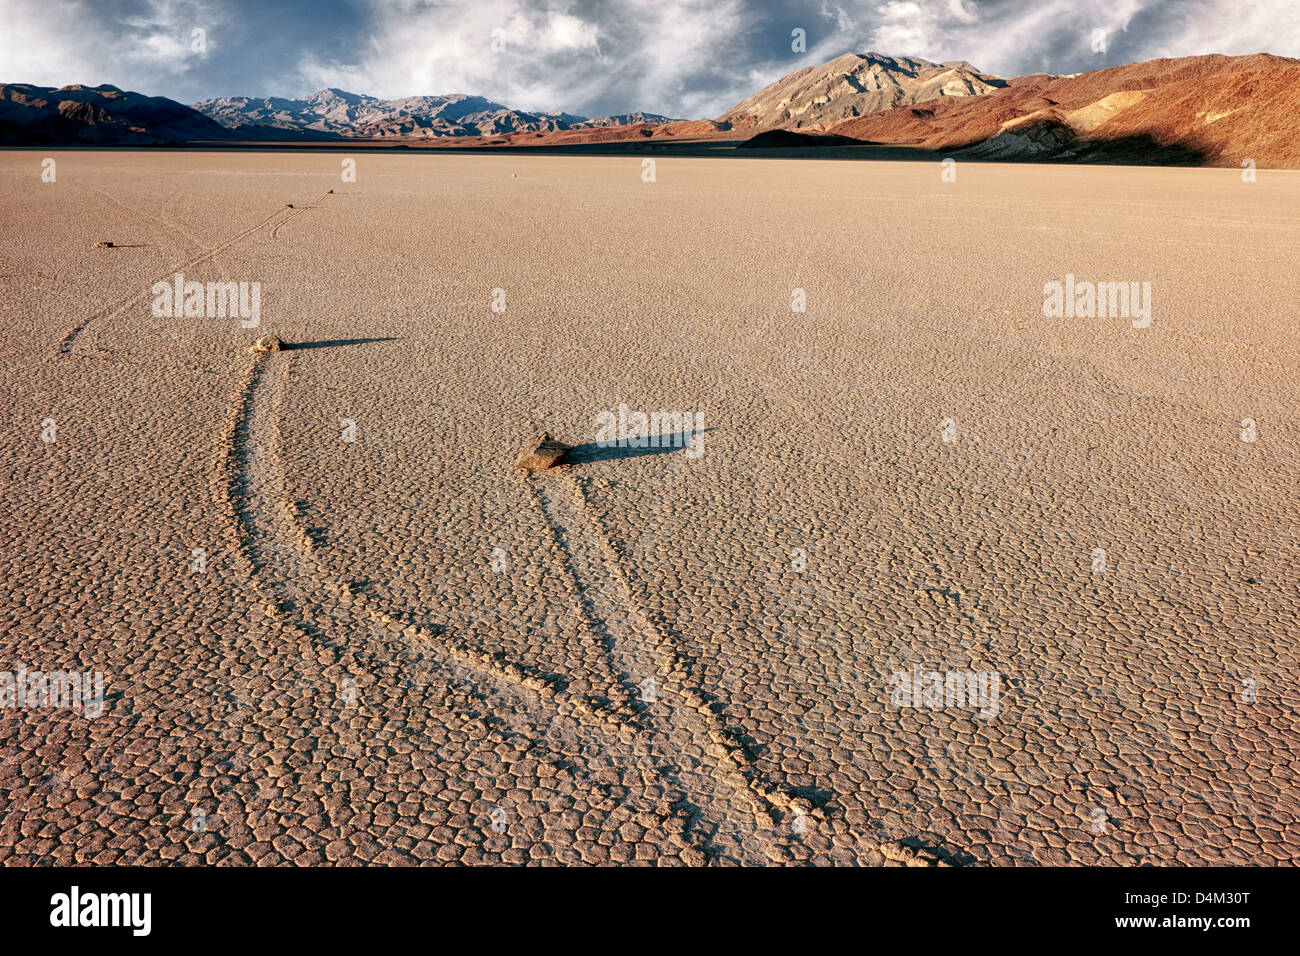 Moving rocks at The Racetrack leave trail imprints in the playa of California's Death Valley National Park. Stock Photo